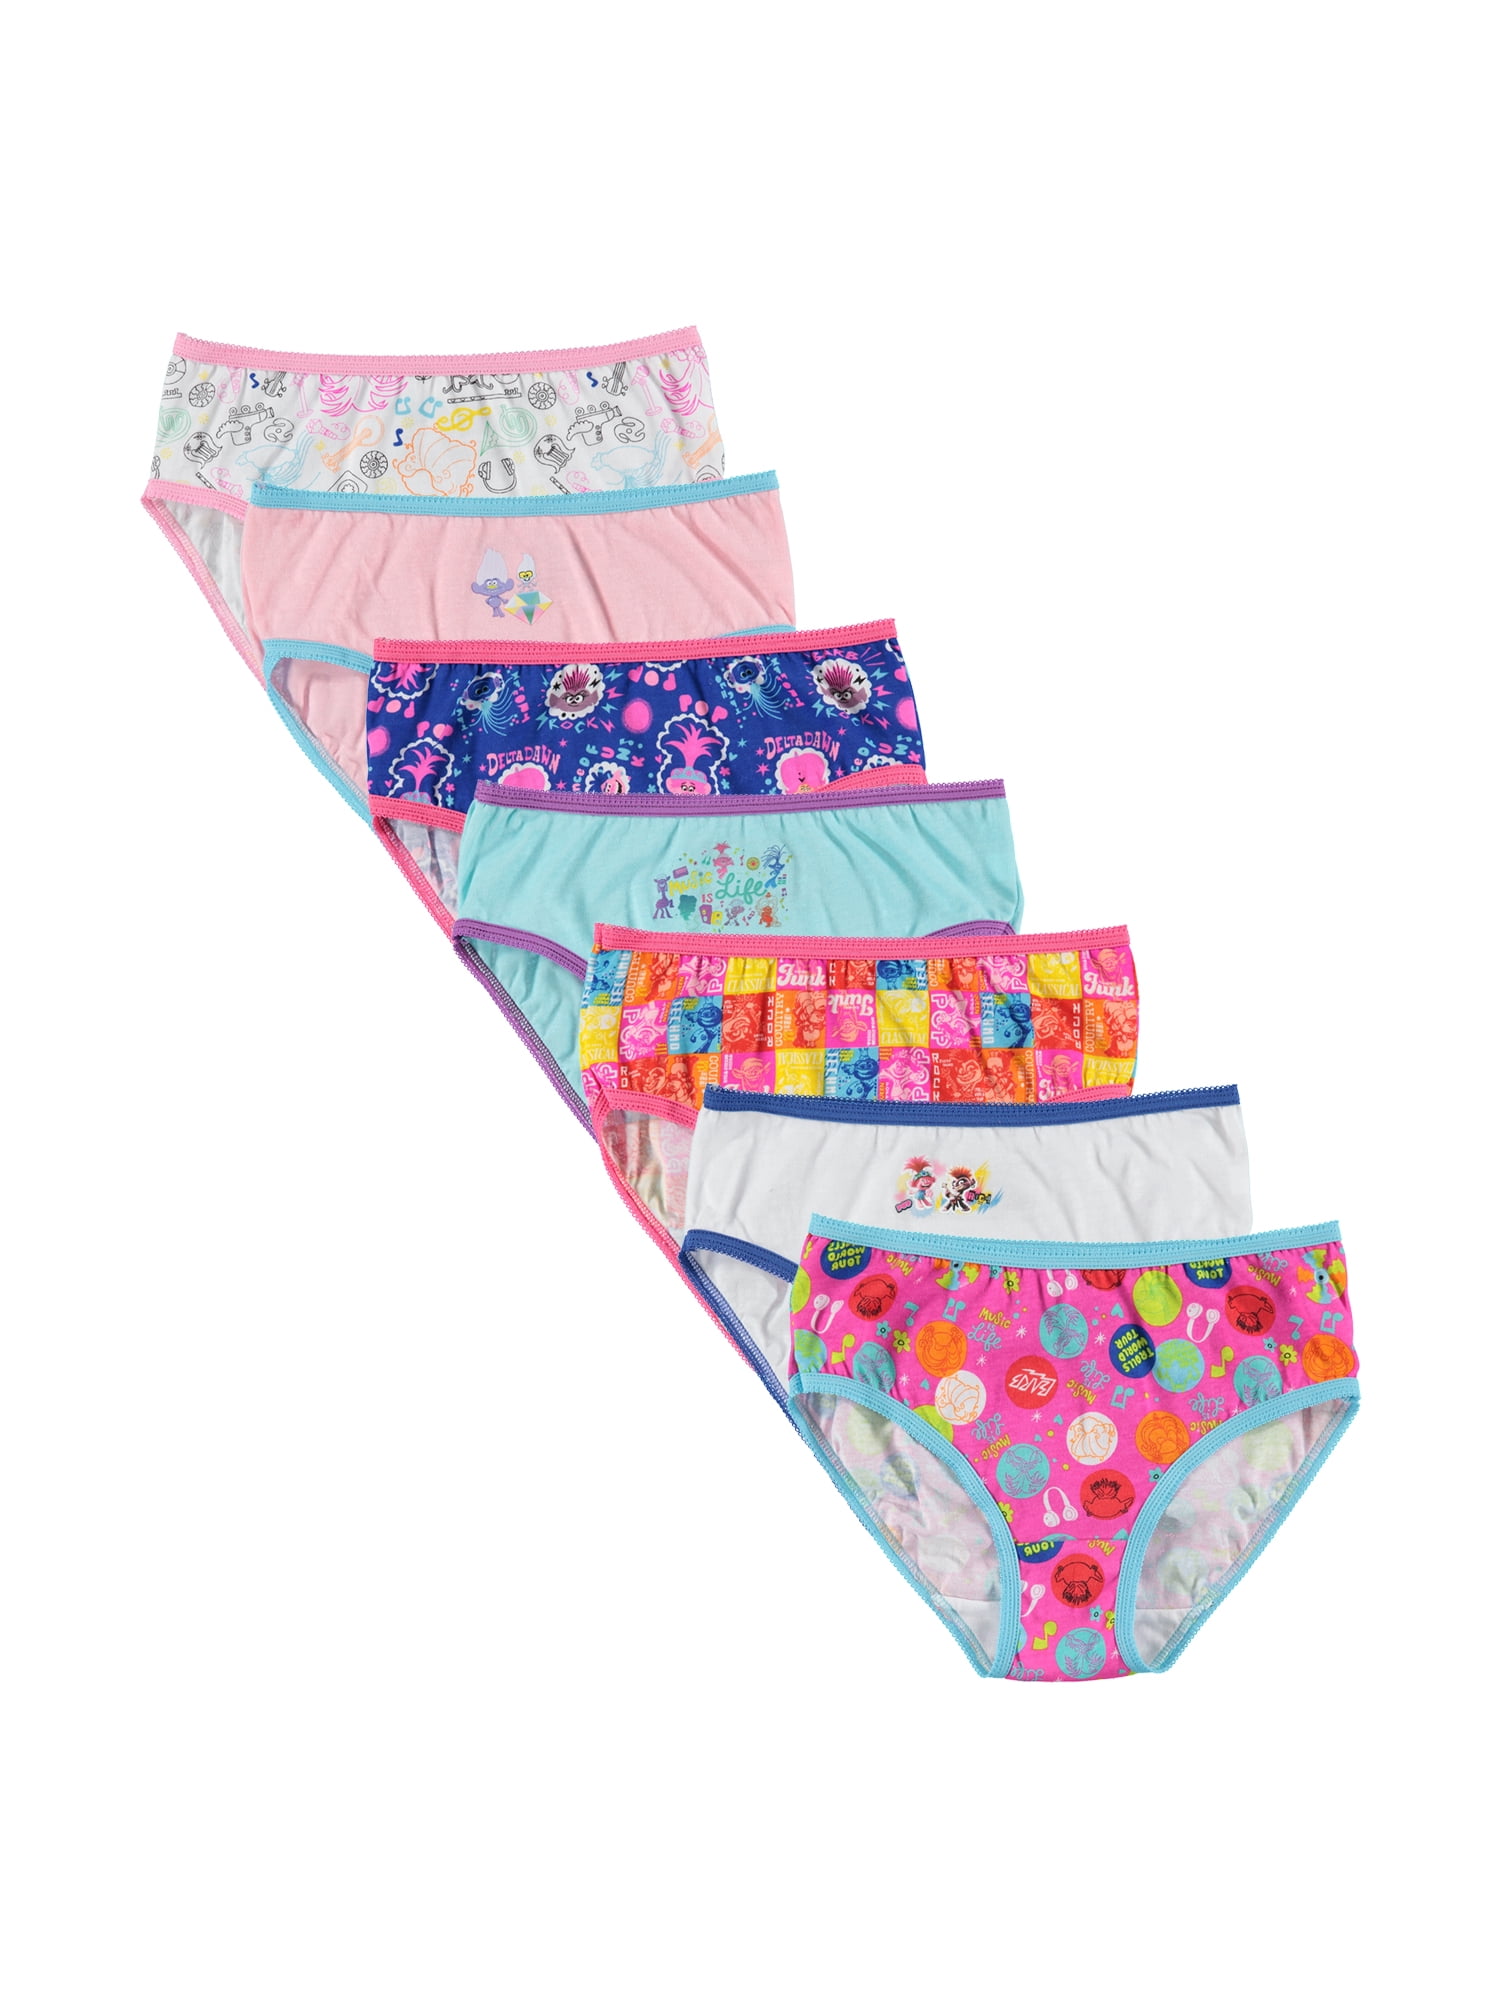 Teen Girls Underwear 7 Pack Mixed Colour Briefs/Pants/Knickers . One Size To Fit 11-16 Yrs 